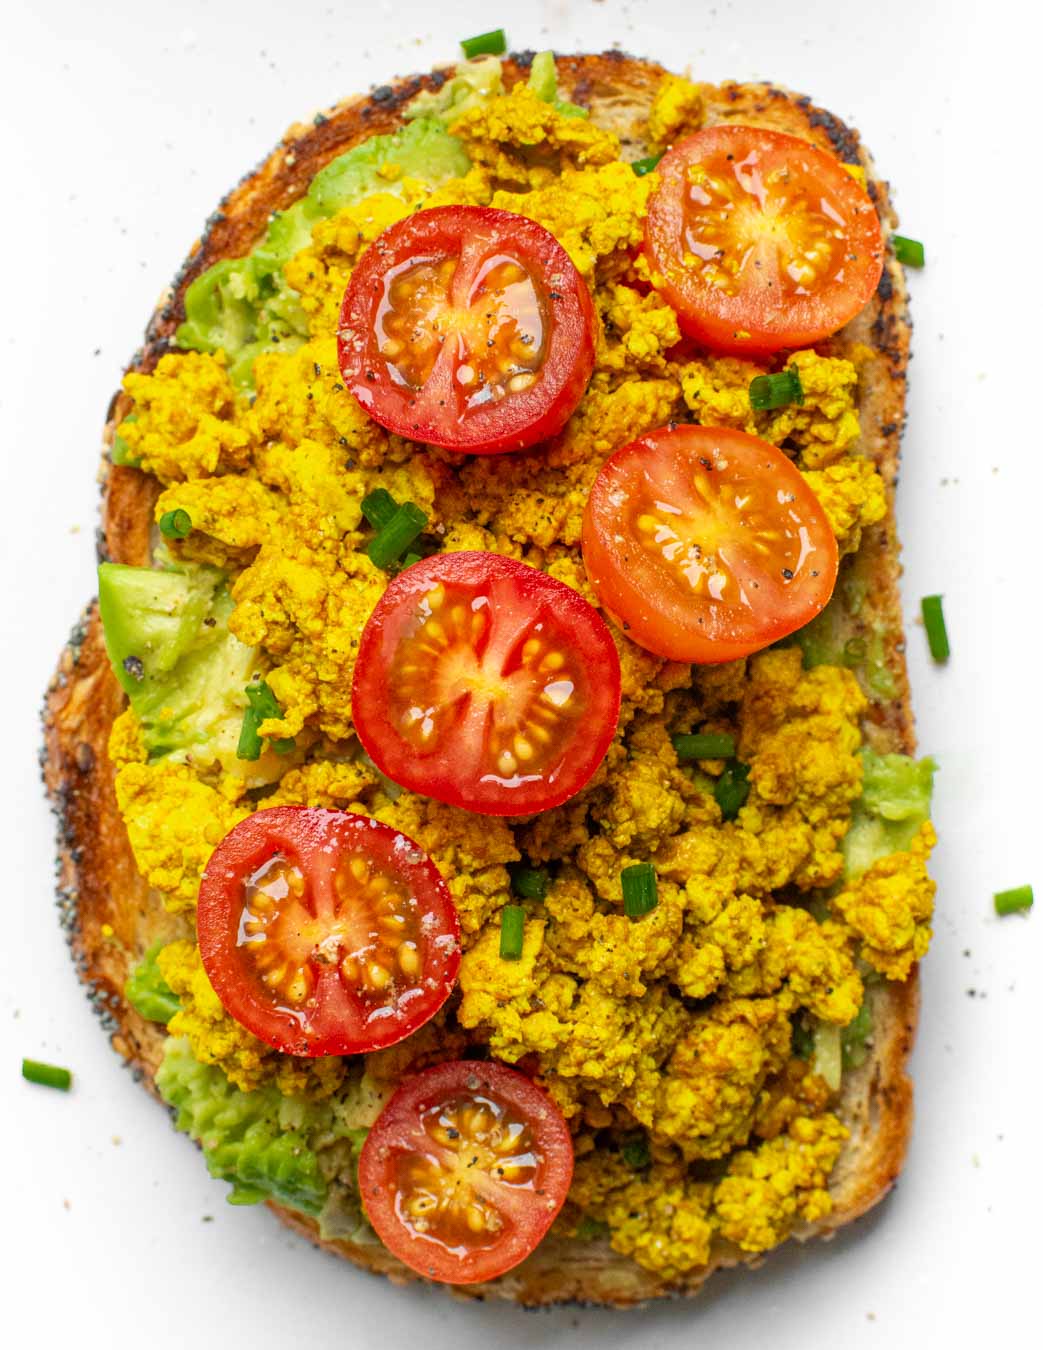 10-Minute Tofu Scramble recipe served on toast with tomatoes.